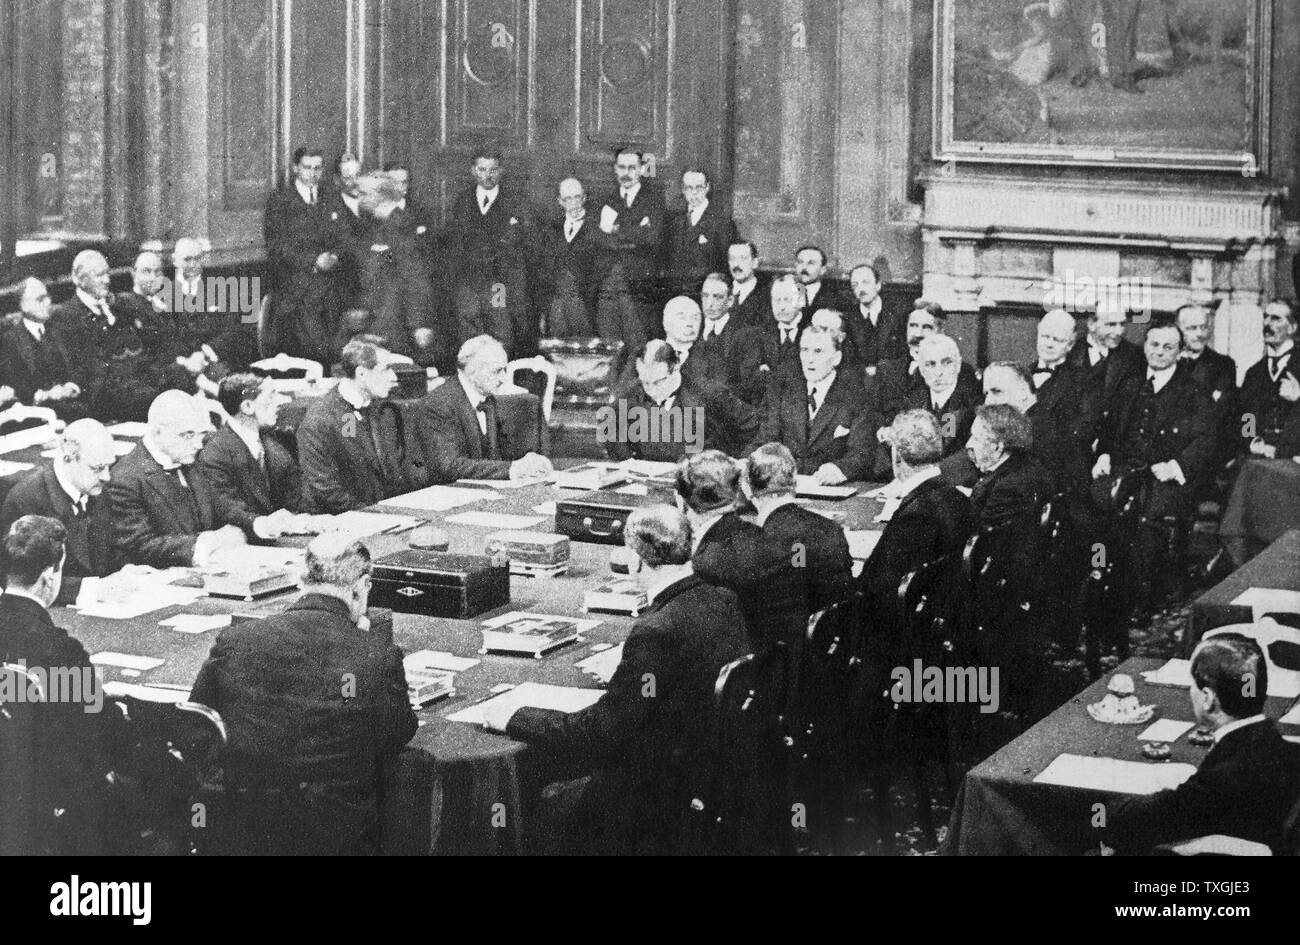 Austen Chamberlain and Stanley Baldwin sign the Locarno Treaty 1925. The Locarno Treaties were seven agreements negotiated at Locarno, Switzerland, on 5â€ì16 October 1925 and formally signed in London on 1 December, in which the First World War Western European Allied powers and the new states of Central and Eastern Europe sought to secure the post-war territorial settlement, Stock Photo